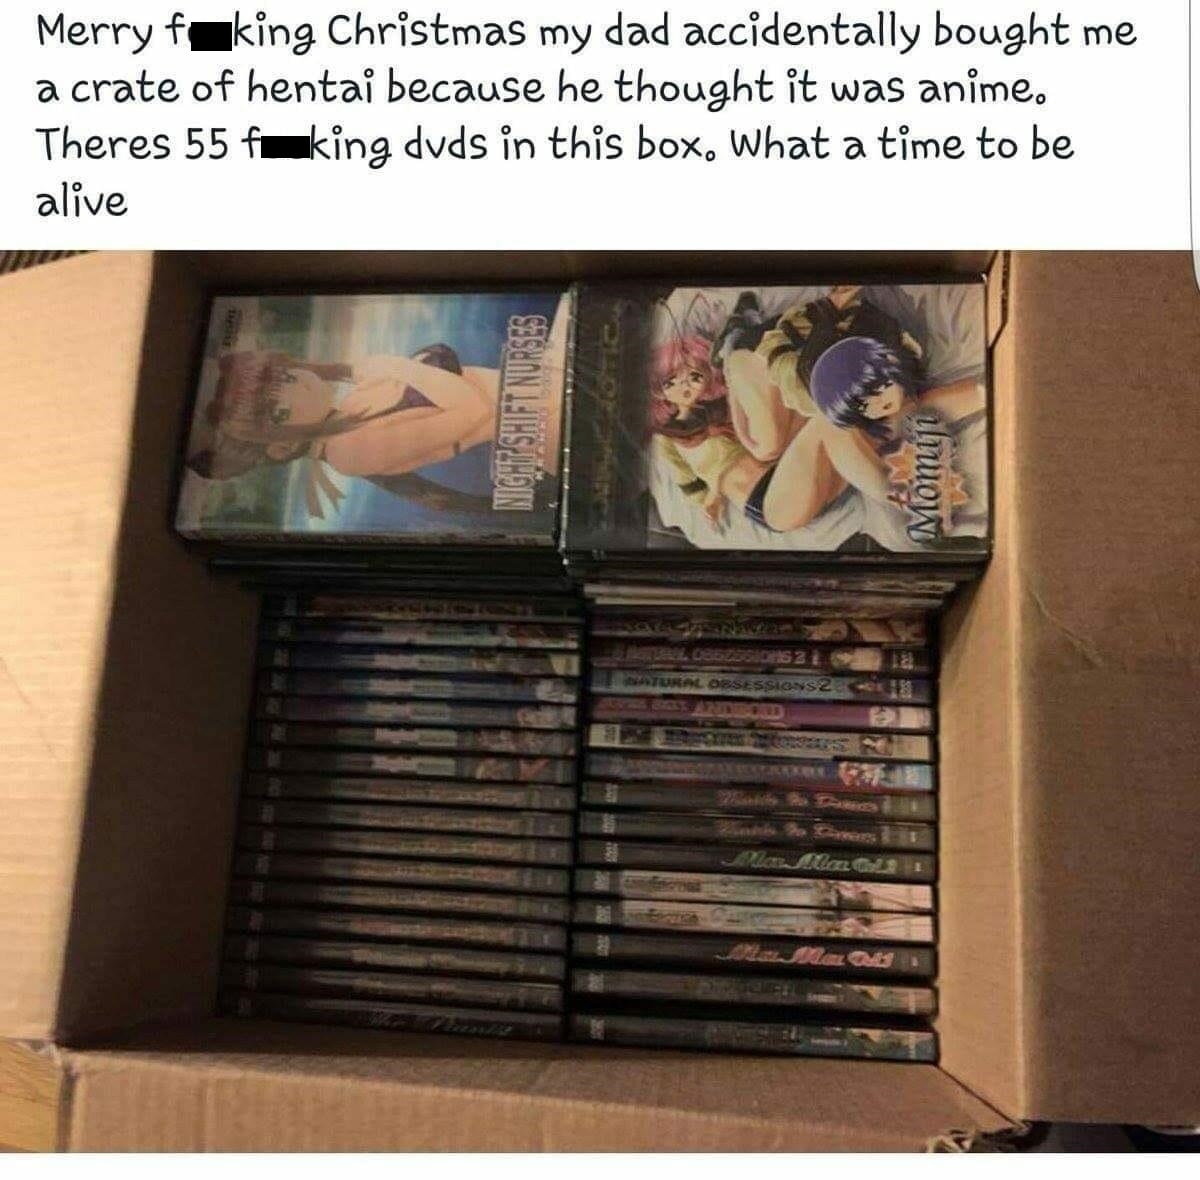 crate of hentai - Merry faking Christmas my dad accidentally bought me a crate of hentai because he thought it was anime. Theres 55 faking dvds in this box, What a time to be alive Sesion Lihsparen Momiji Oral Obsessions